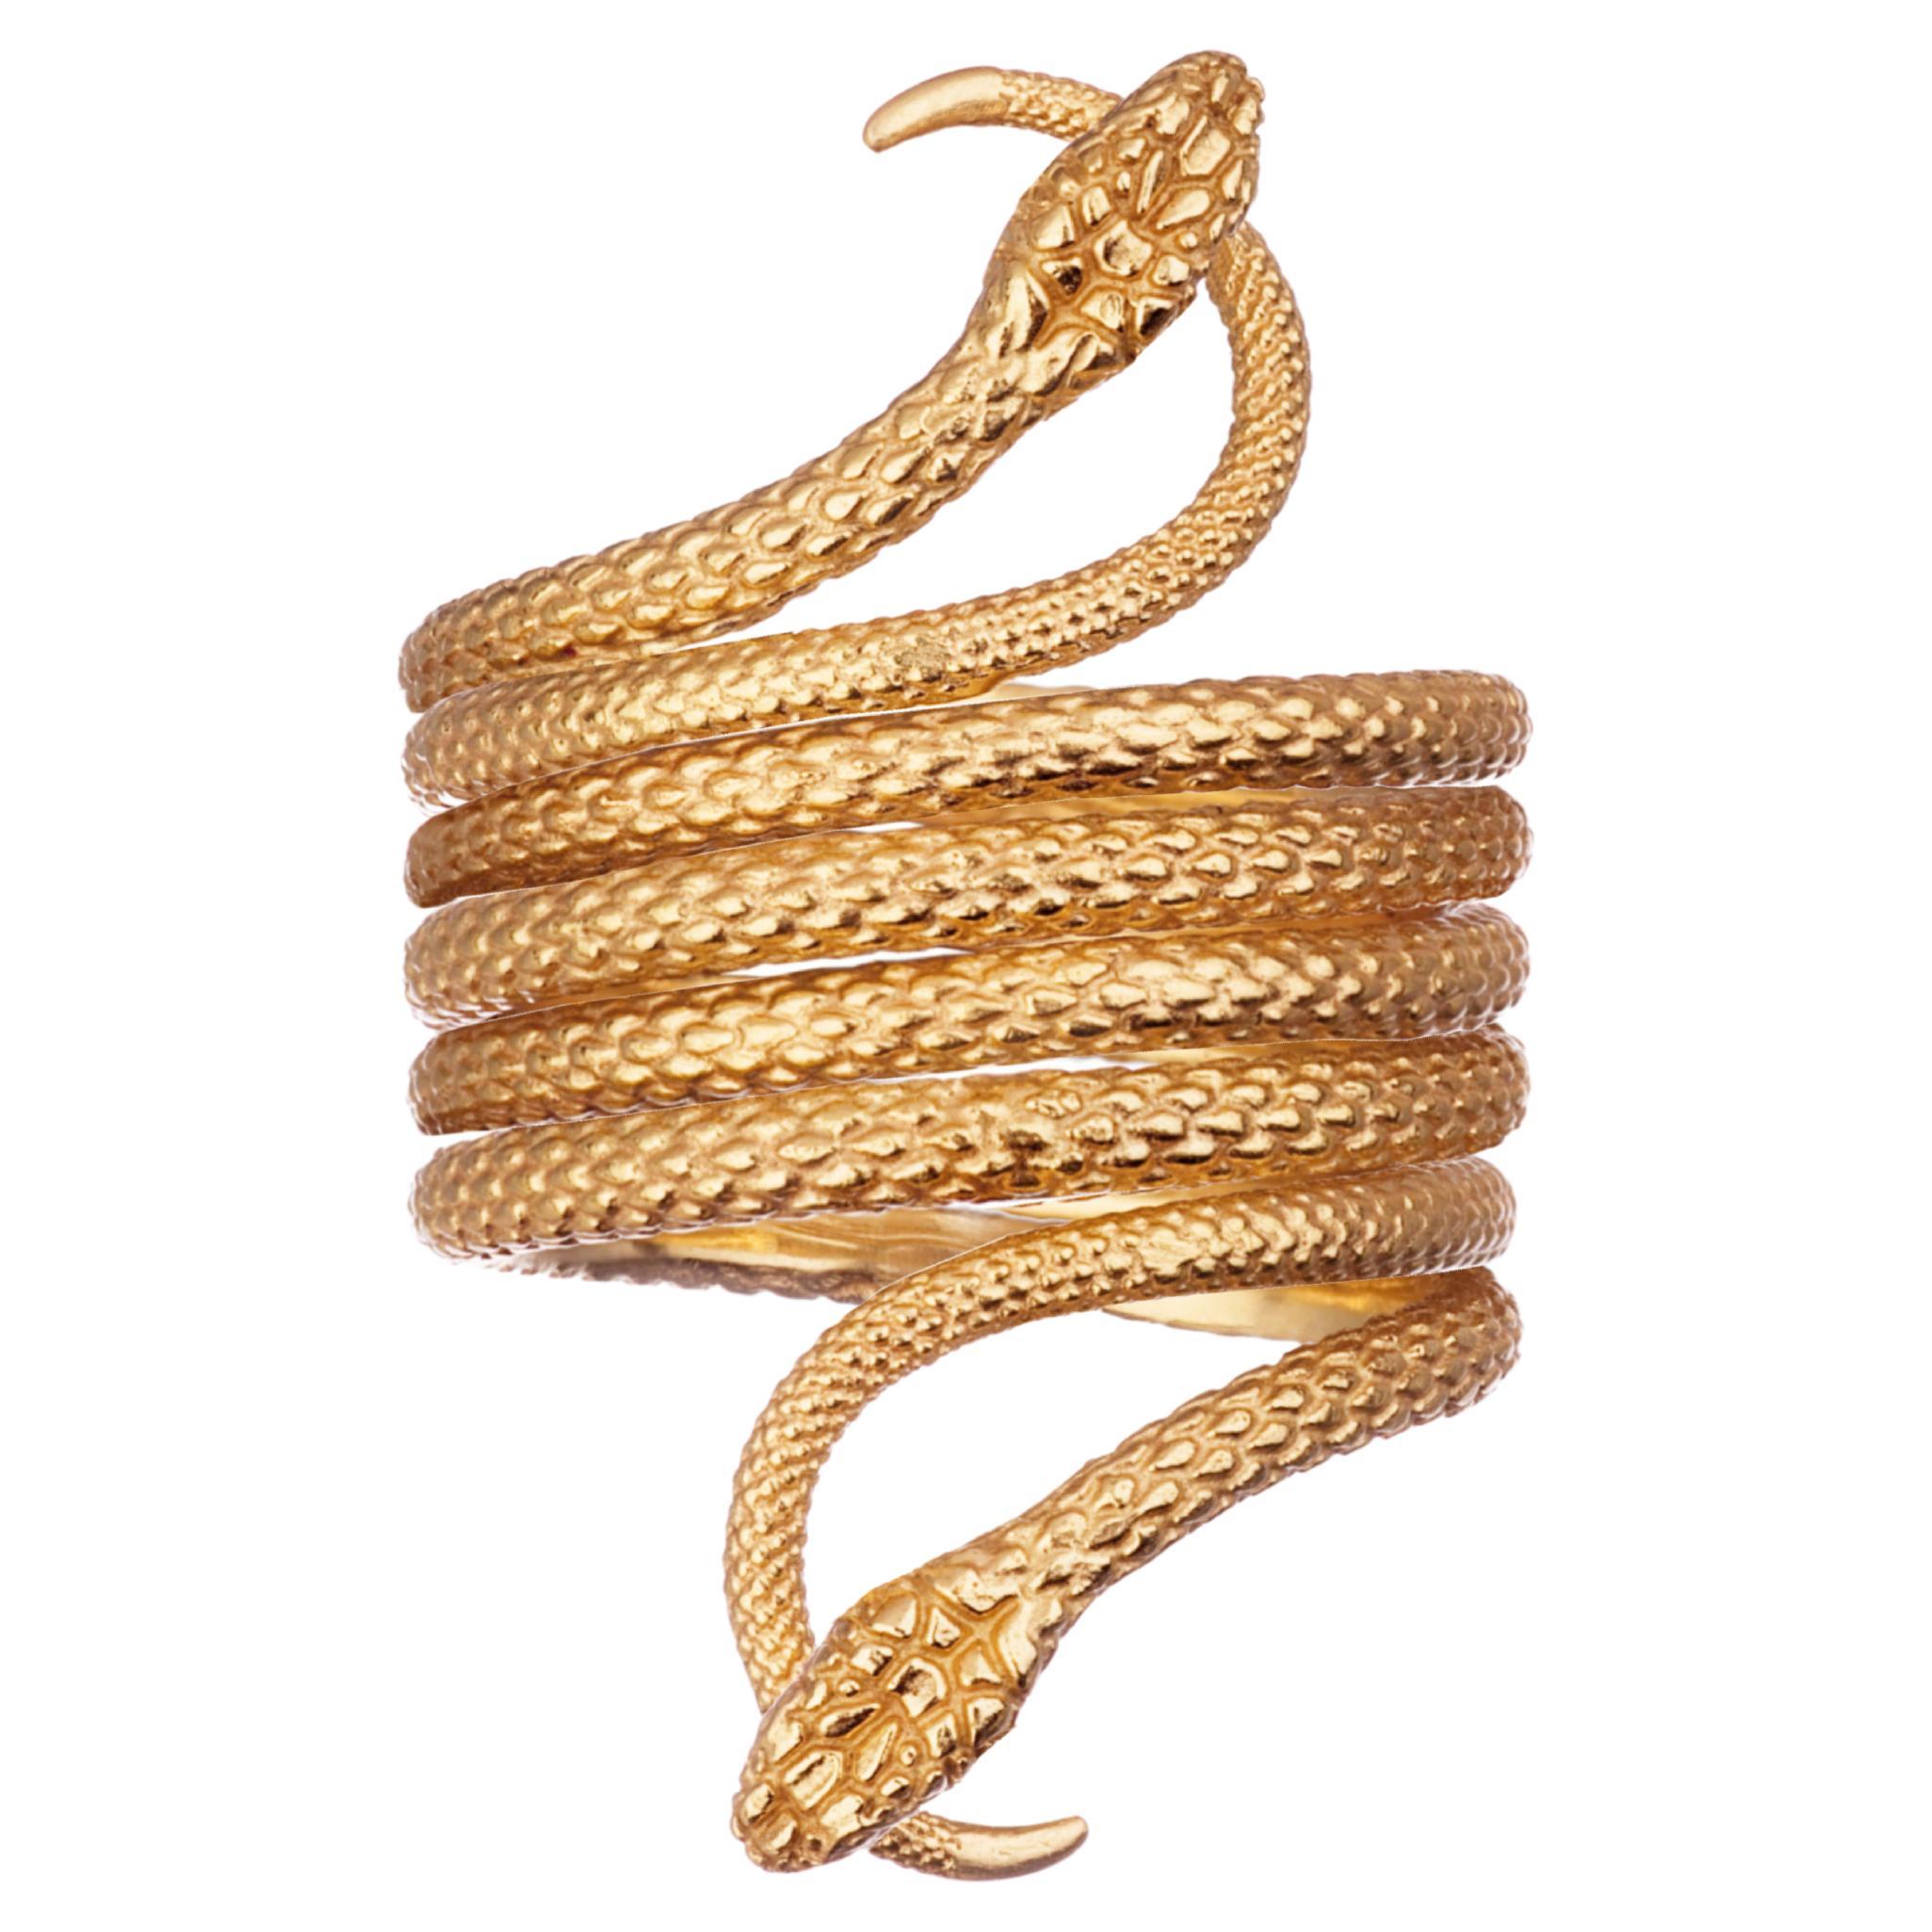 Ouroboros 18kt Gold Snakes Ring